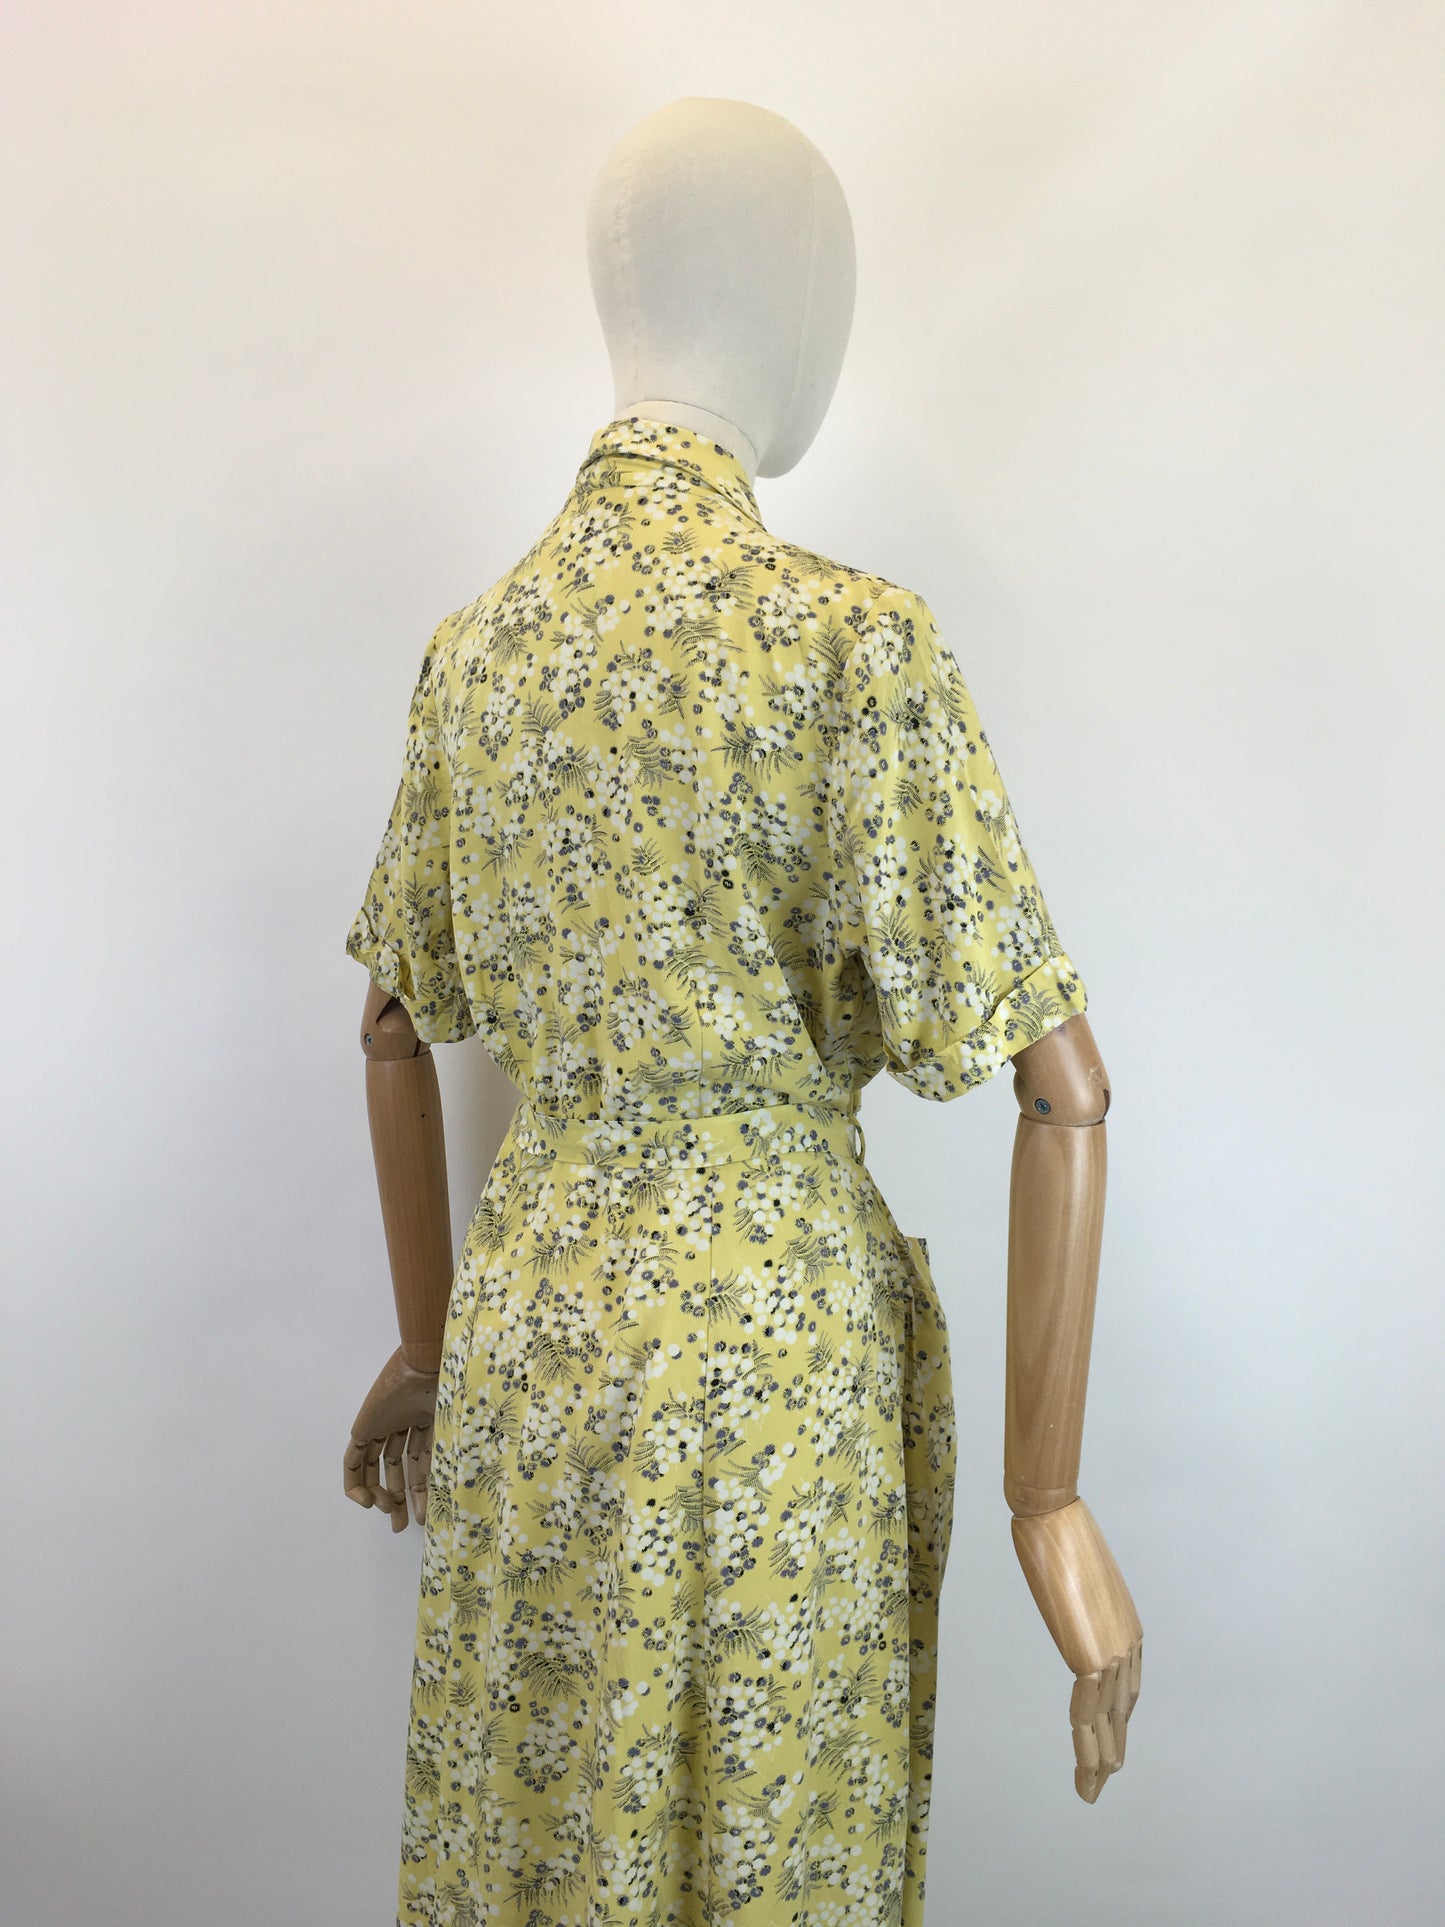 Original 1940’s Darling Floppy Cotton Day Dress - In Soft Yellow With Hints of Grey, Black and White in Floral